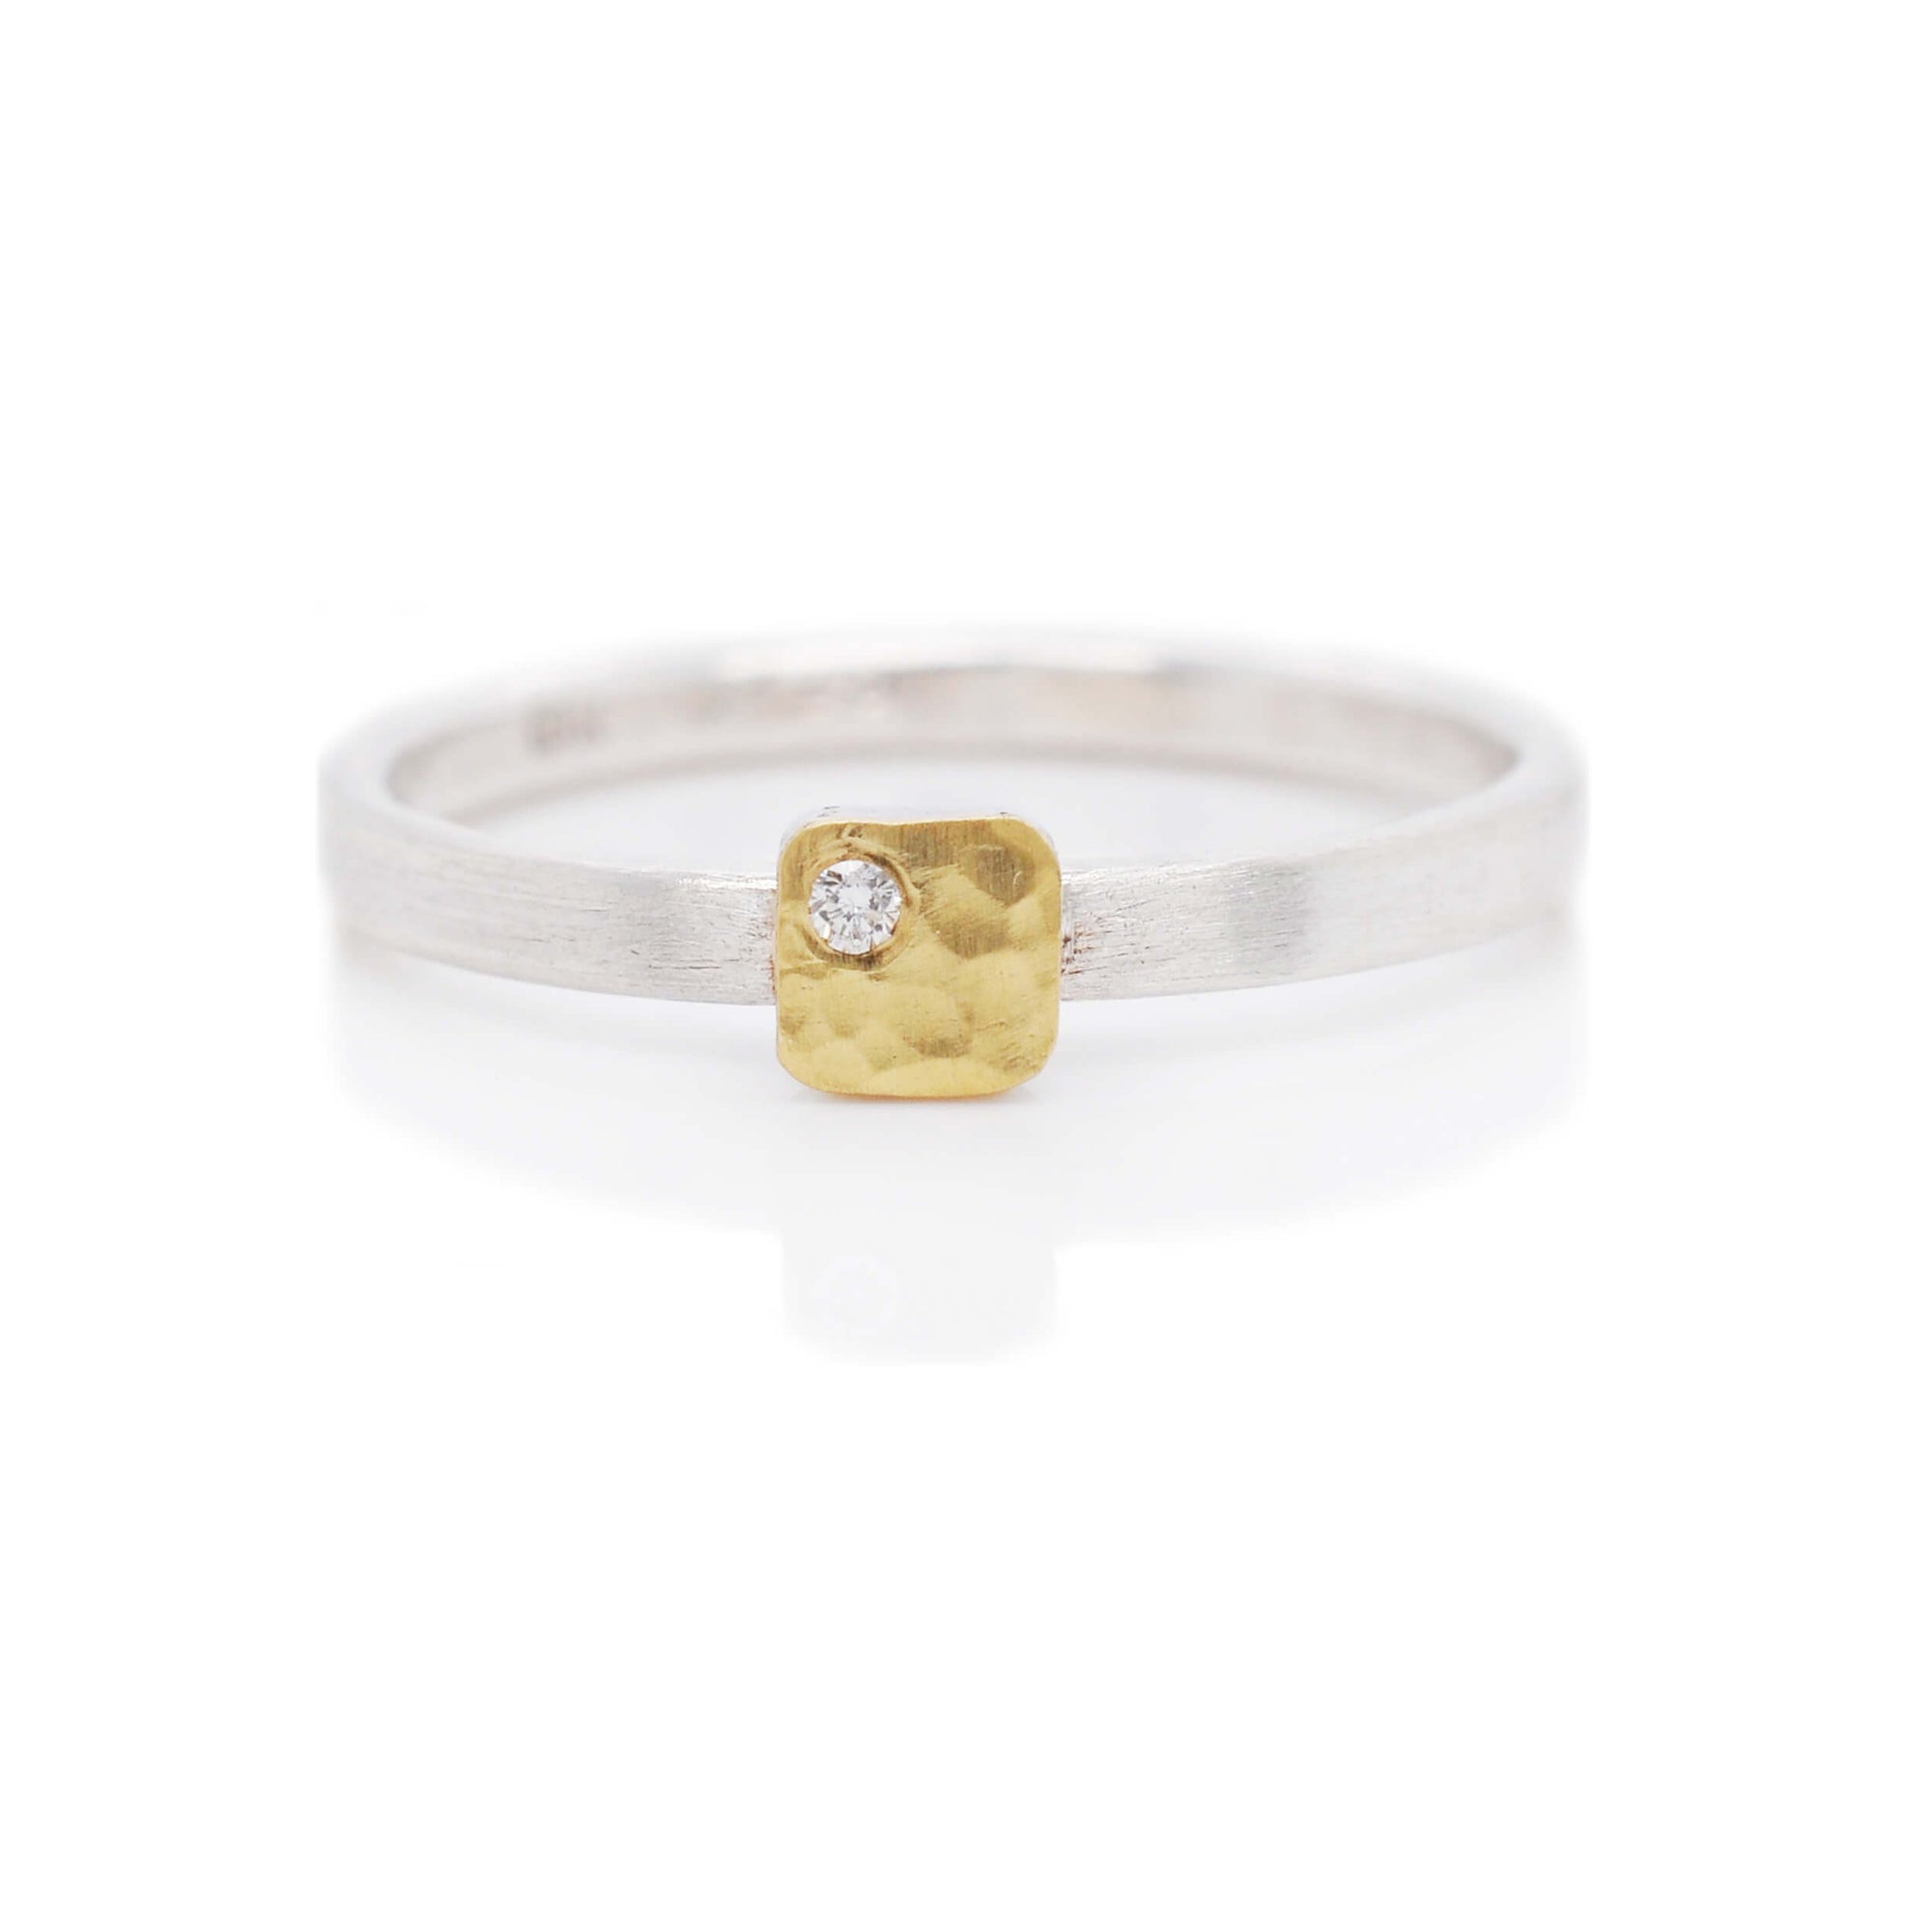 Hammered yellow gold and sterling silver cell ring with white diamond accent. Handmade by EC Design Jewelry in Minneapolis, MN.